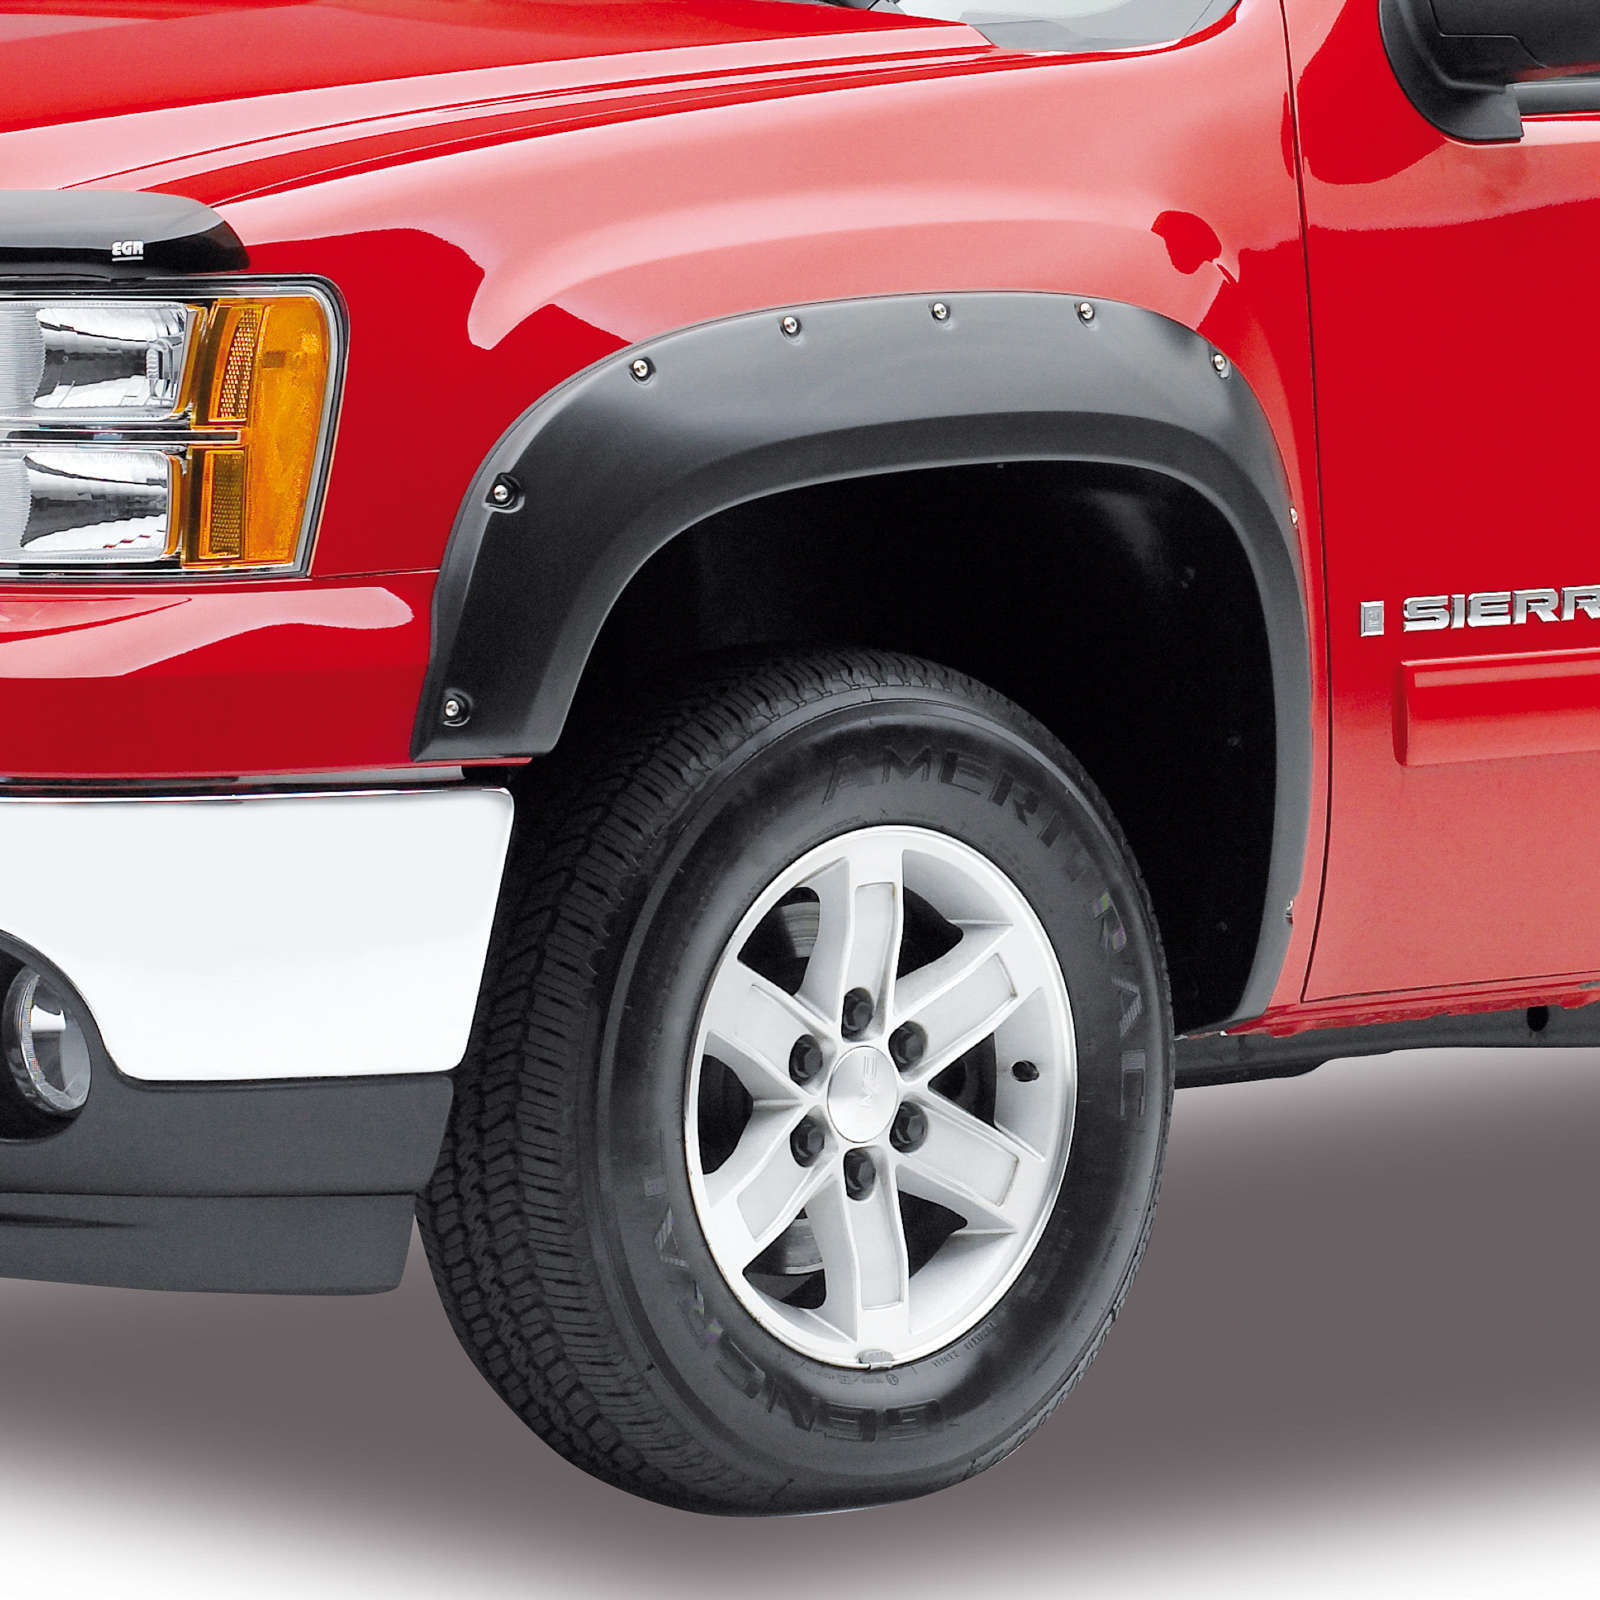 EGR Fender Flare Fits 2007-2010 GMC Sierra 2500 HD S SLE Bed Length: 97.6, 78.8 & Doors: 4, 2 & Extended Cab , Crew Cab , Standard Cab 
2007-2010 GMC Sierra 3500 HD S SLE Bed Length: 97.6 & Doors: 4, 2 & Extended Cab , Crew Cab , Standard Cab